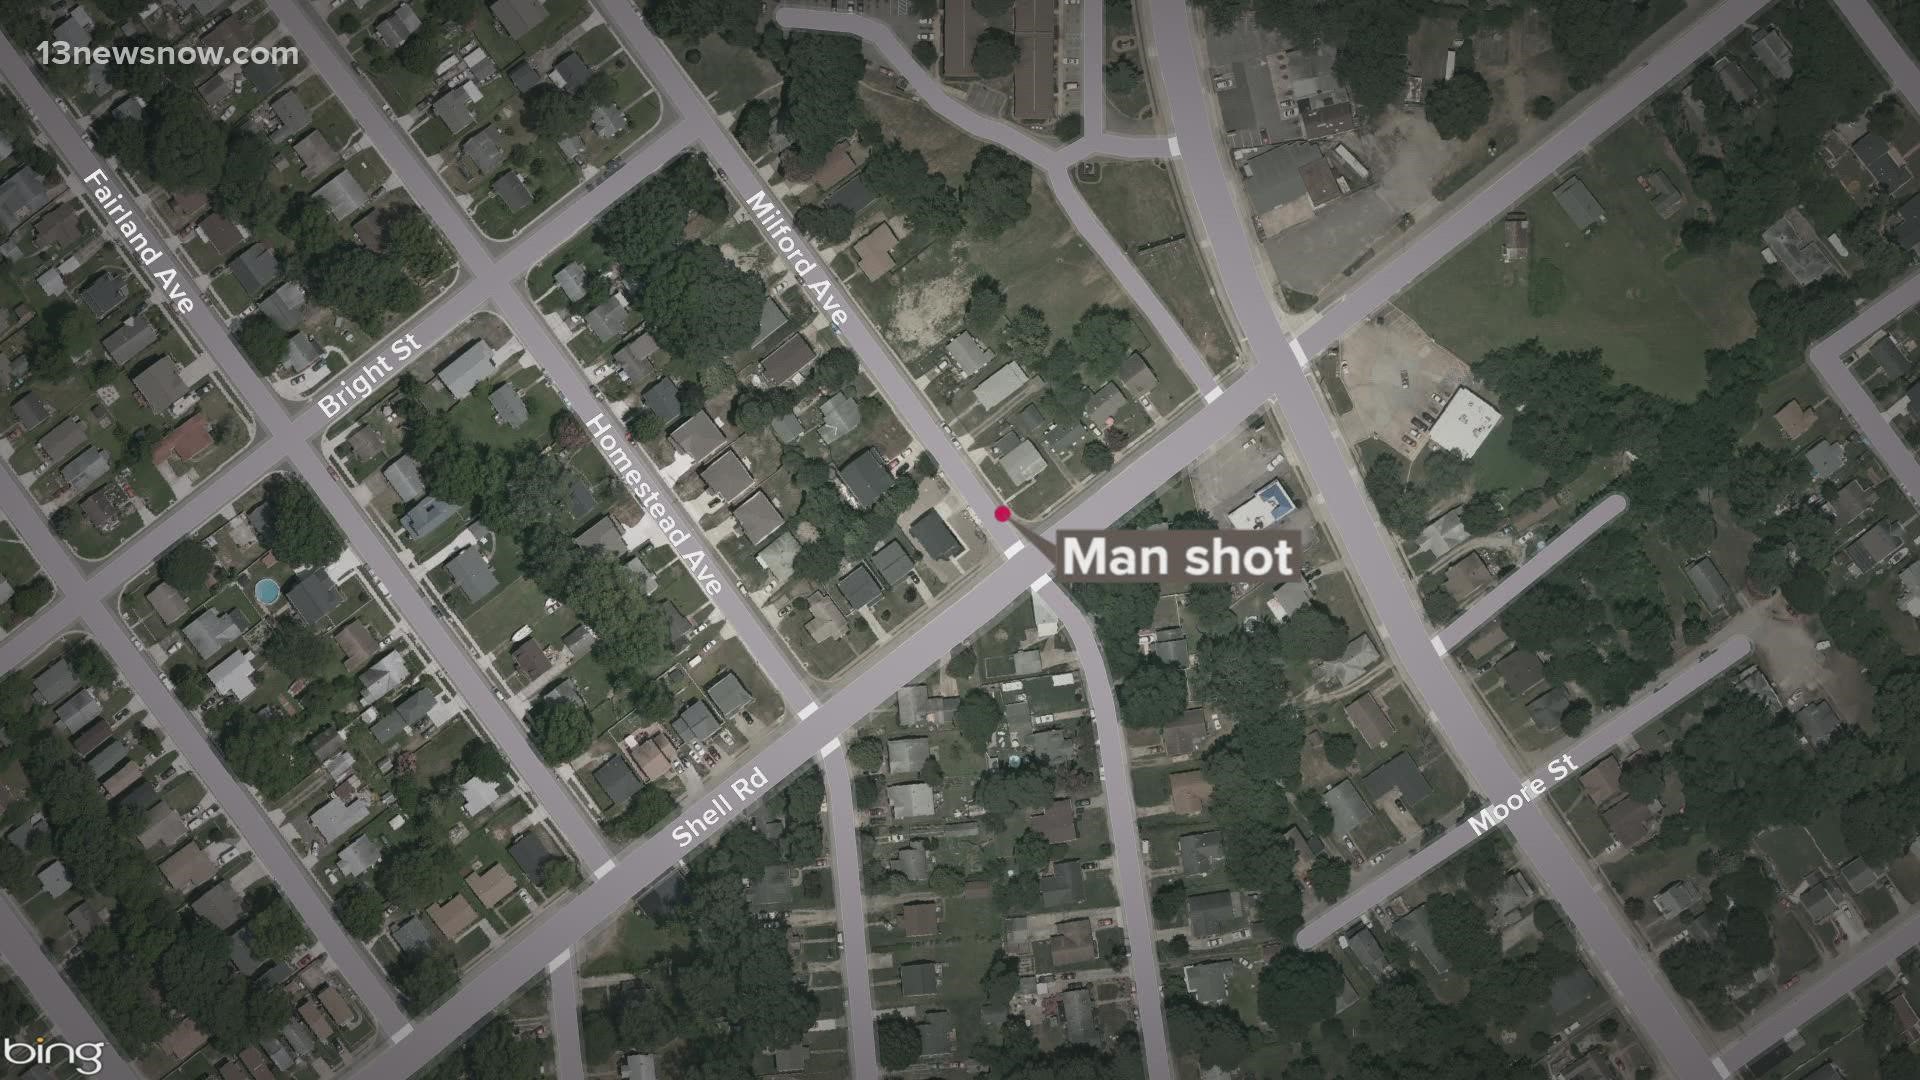 The shooting happened Sunday around 5 p.m., and a man was taken to a hospital with serious injuries, according to the Hampton Police Division.